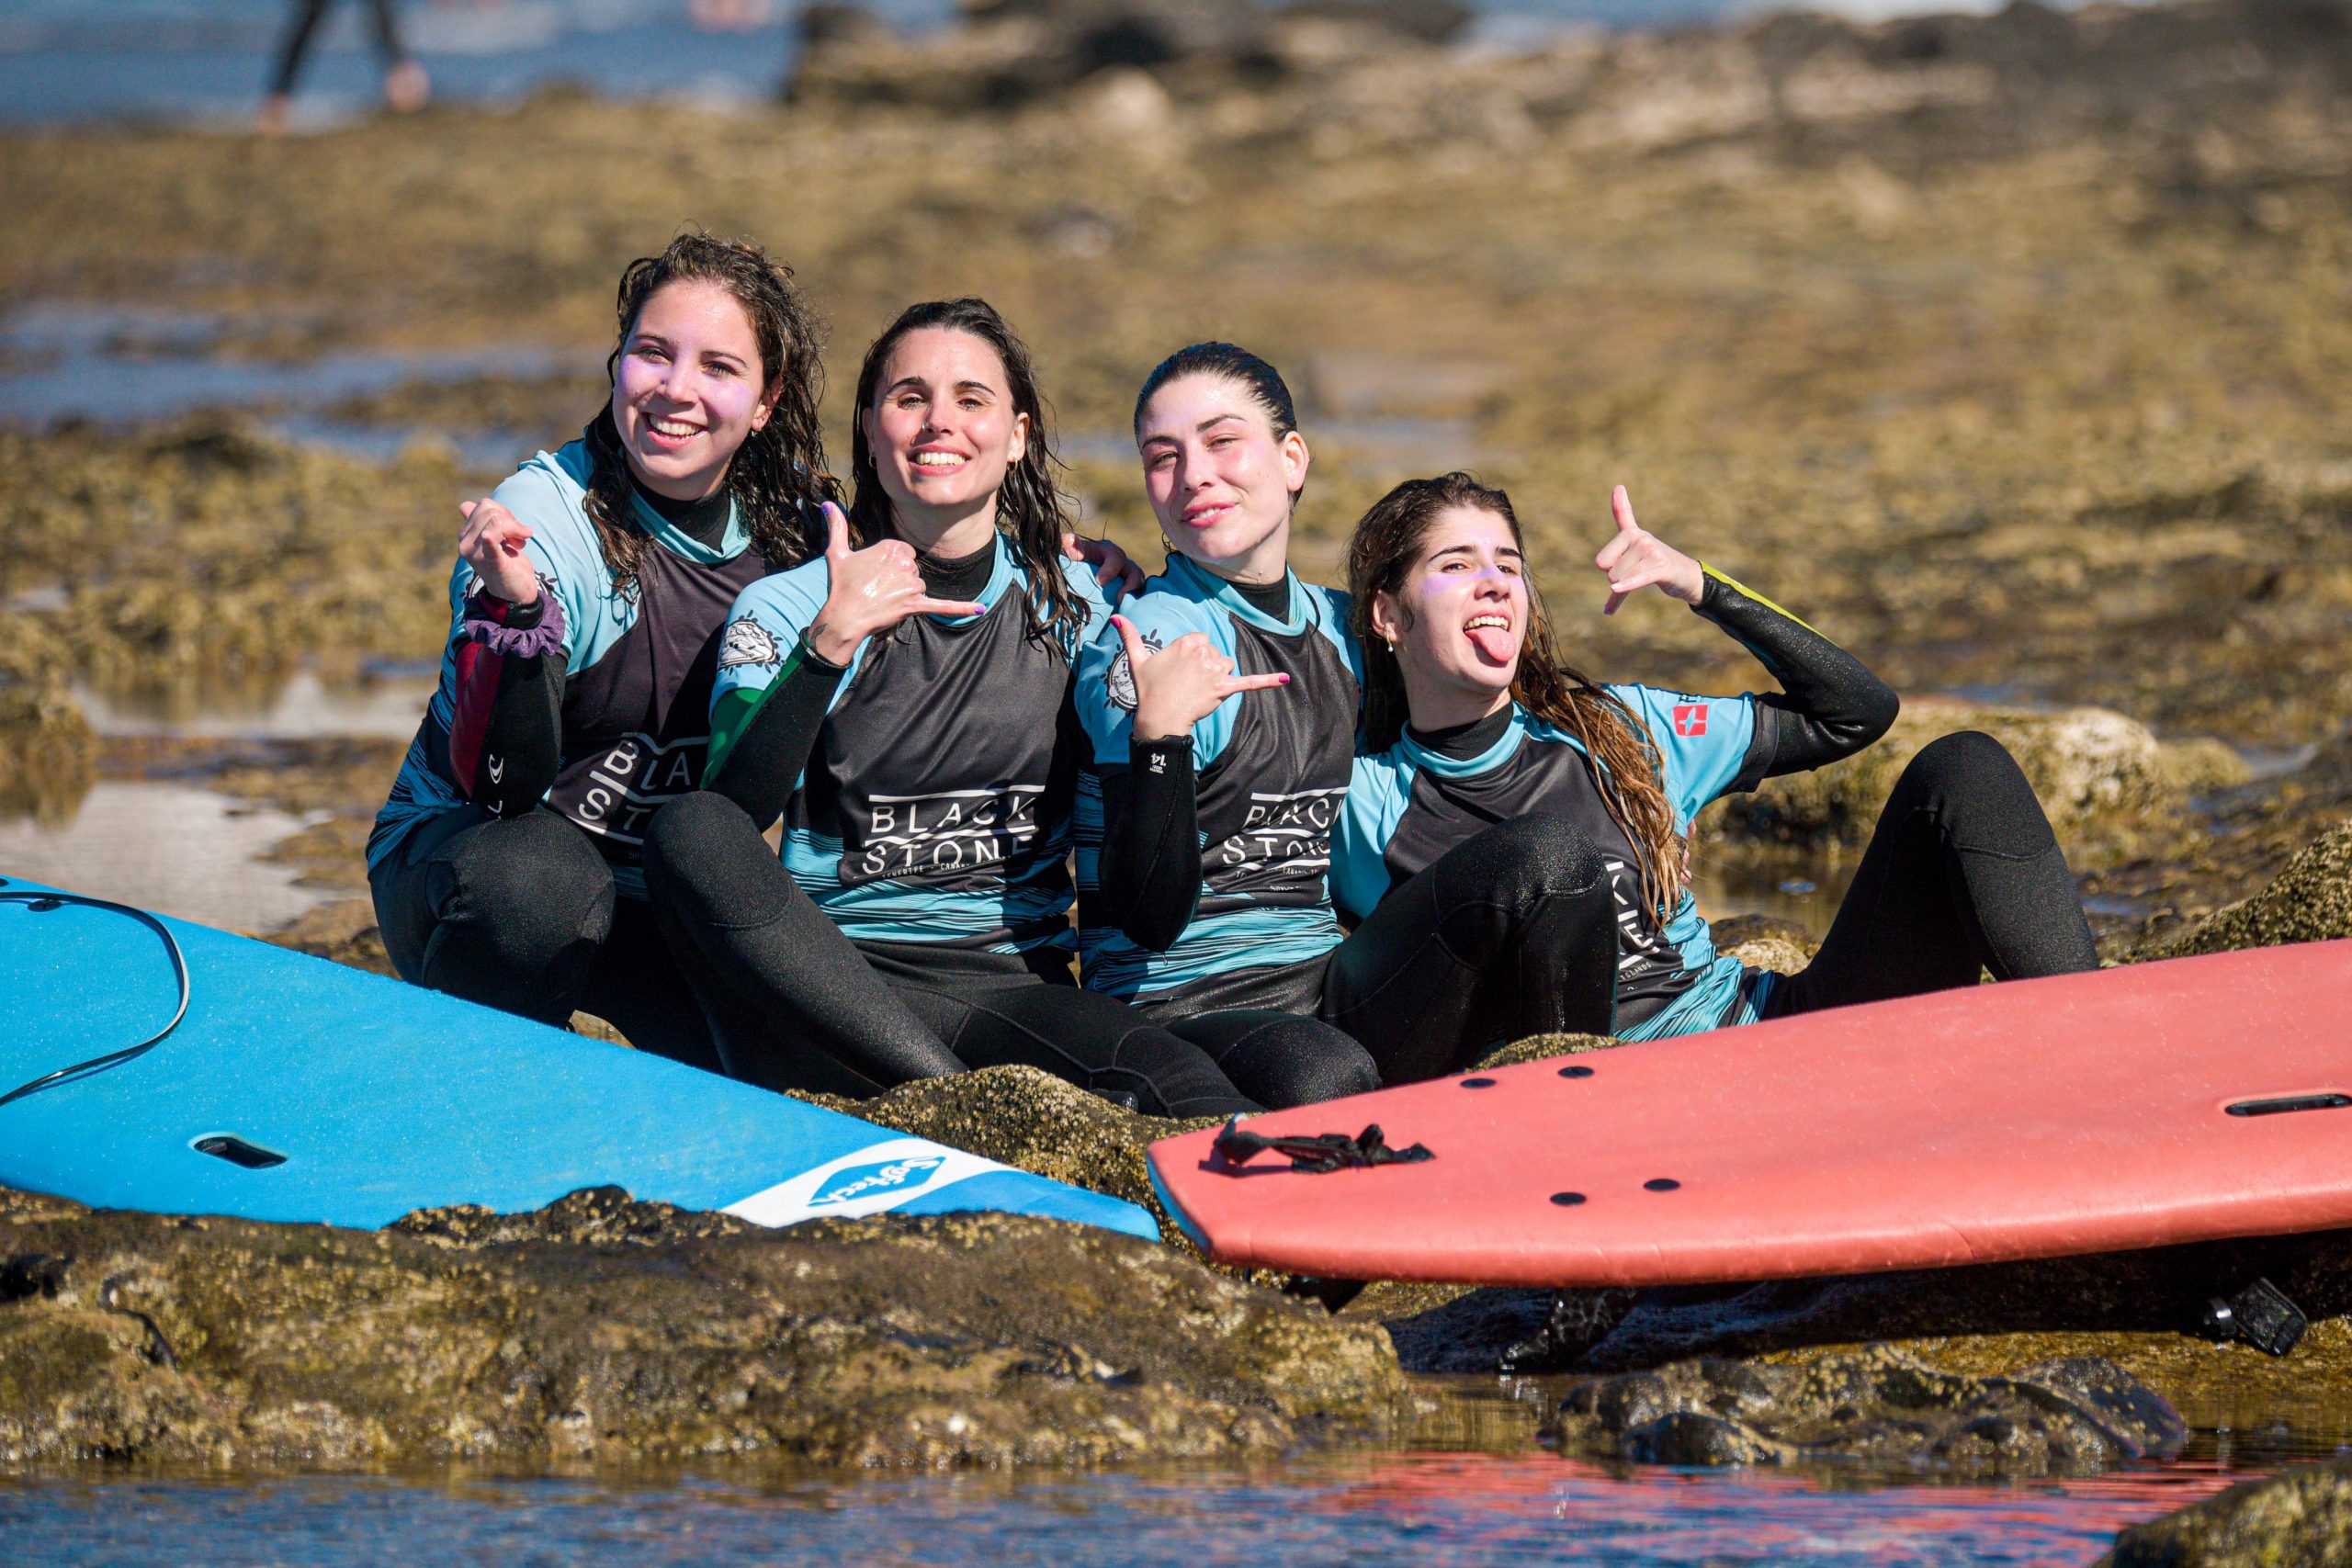 Blackstone Surf Center students smiling in Playa las Américas in Tenerife after a surf lesson